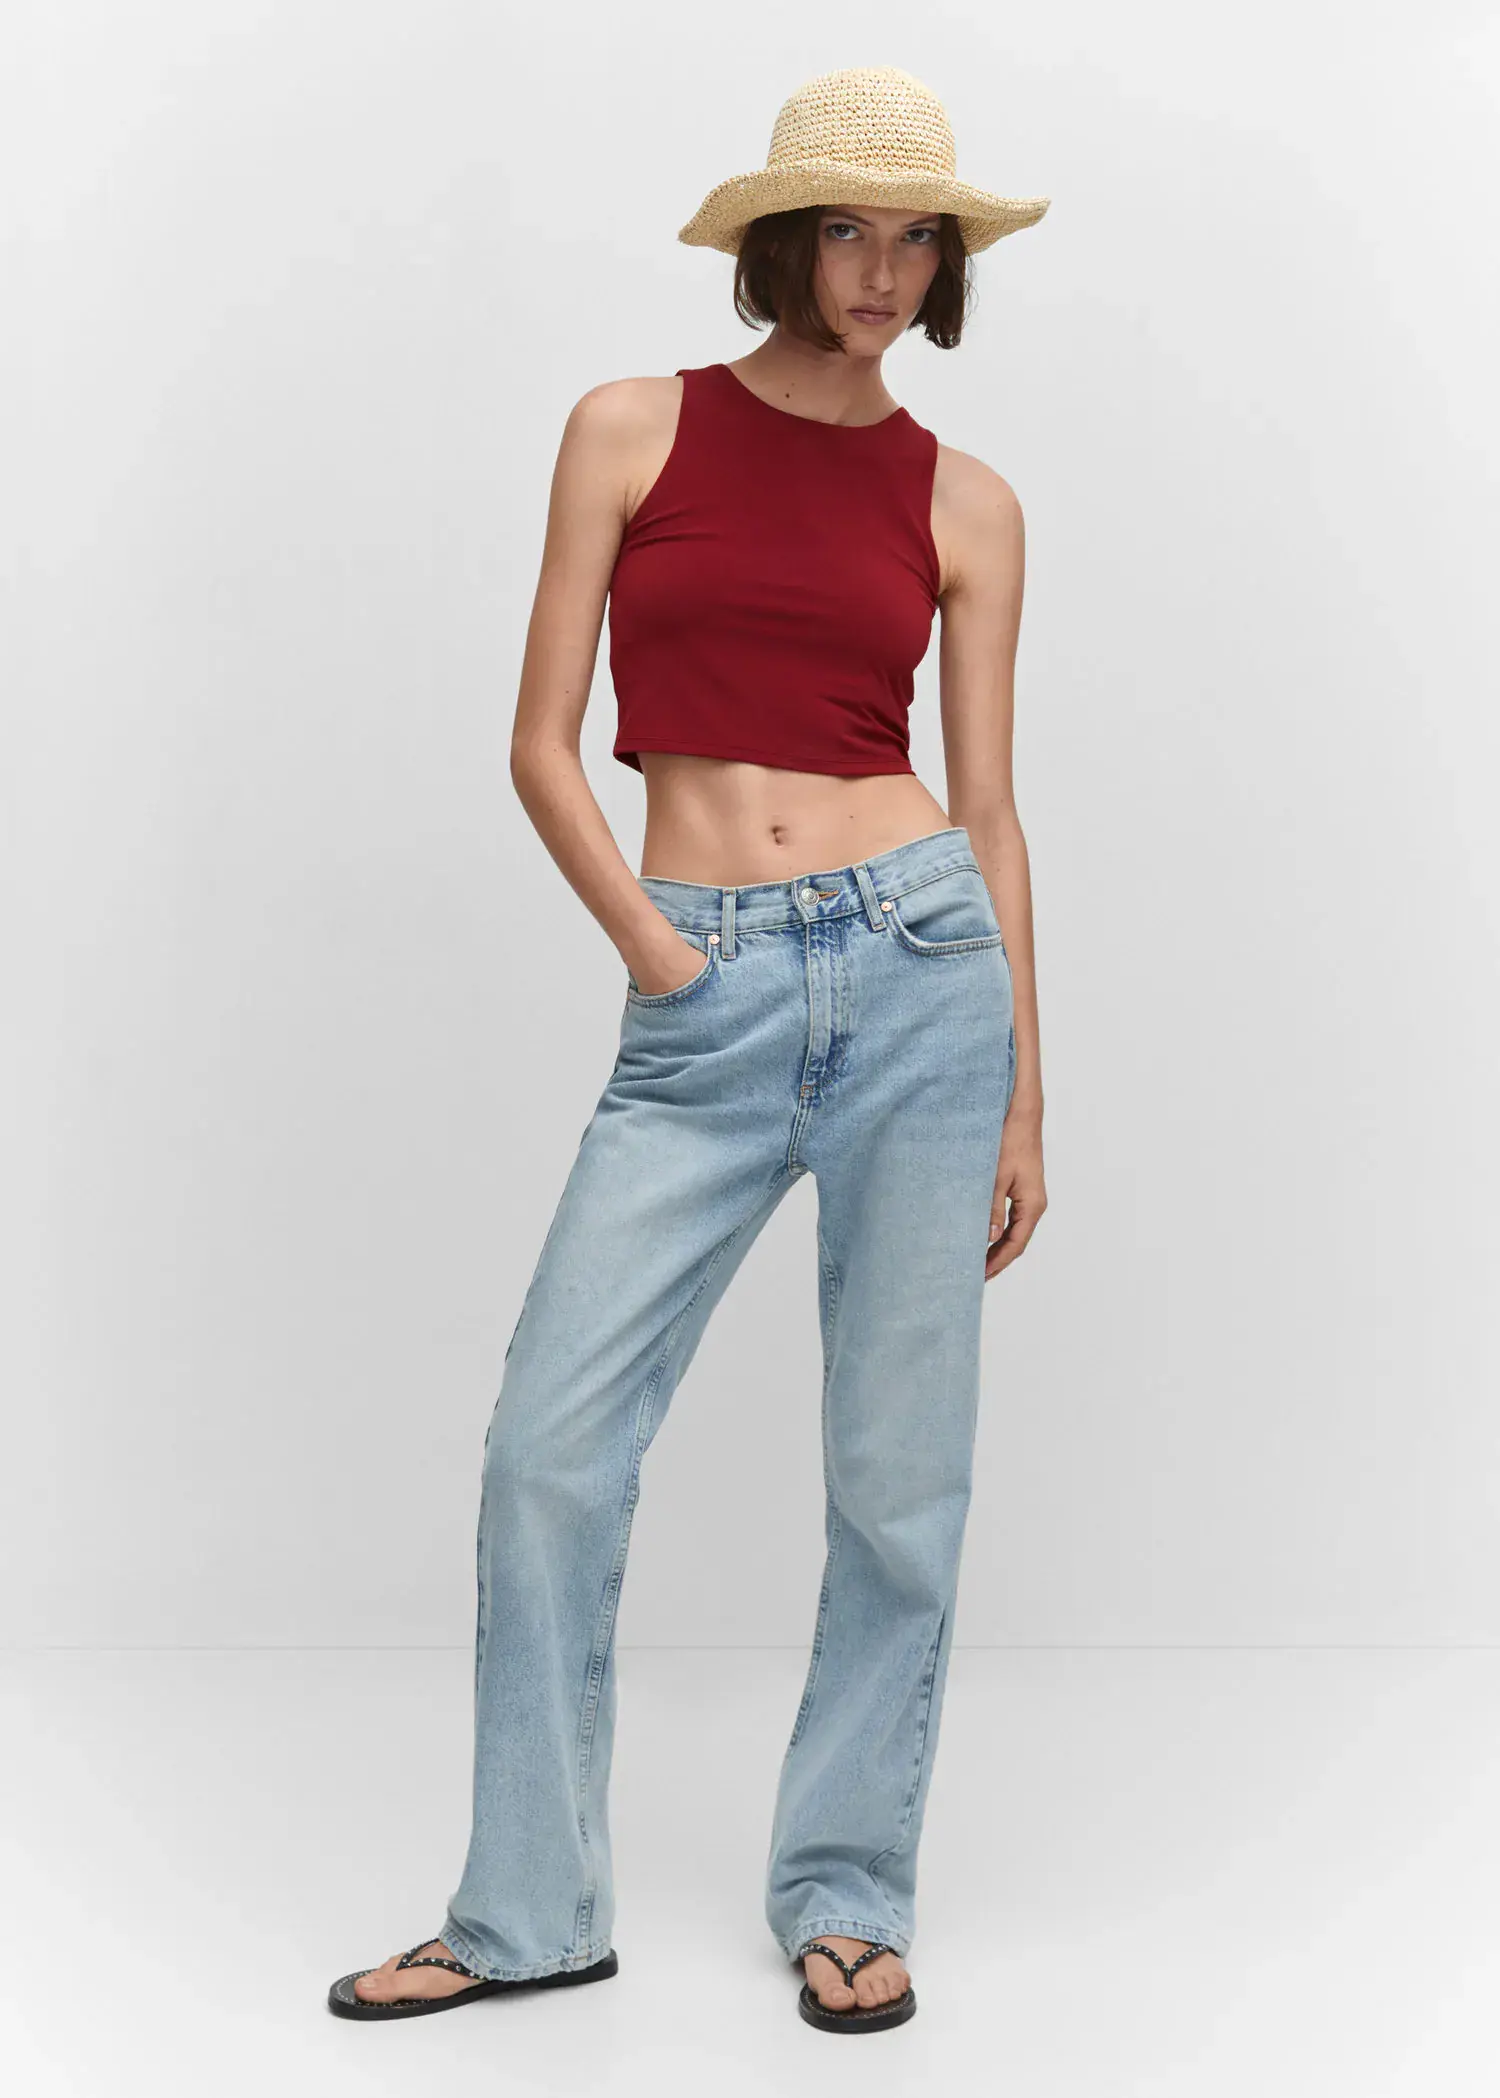 Mango Crop top halter neck. a woman in a red crop top and blue jeans. 